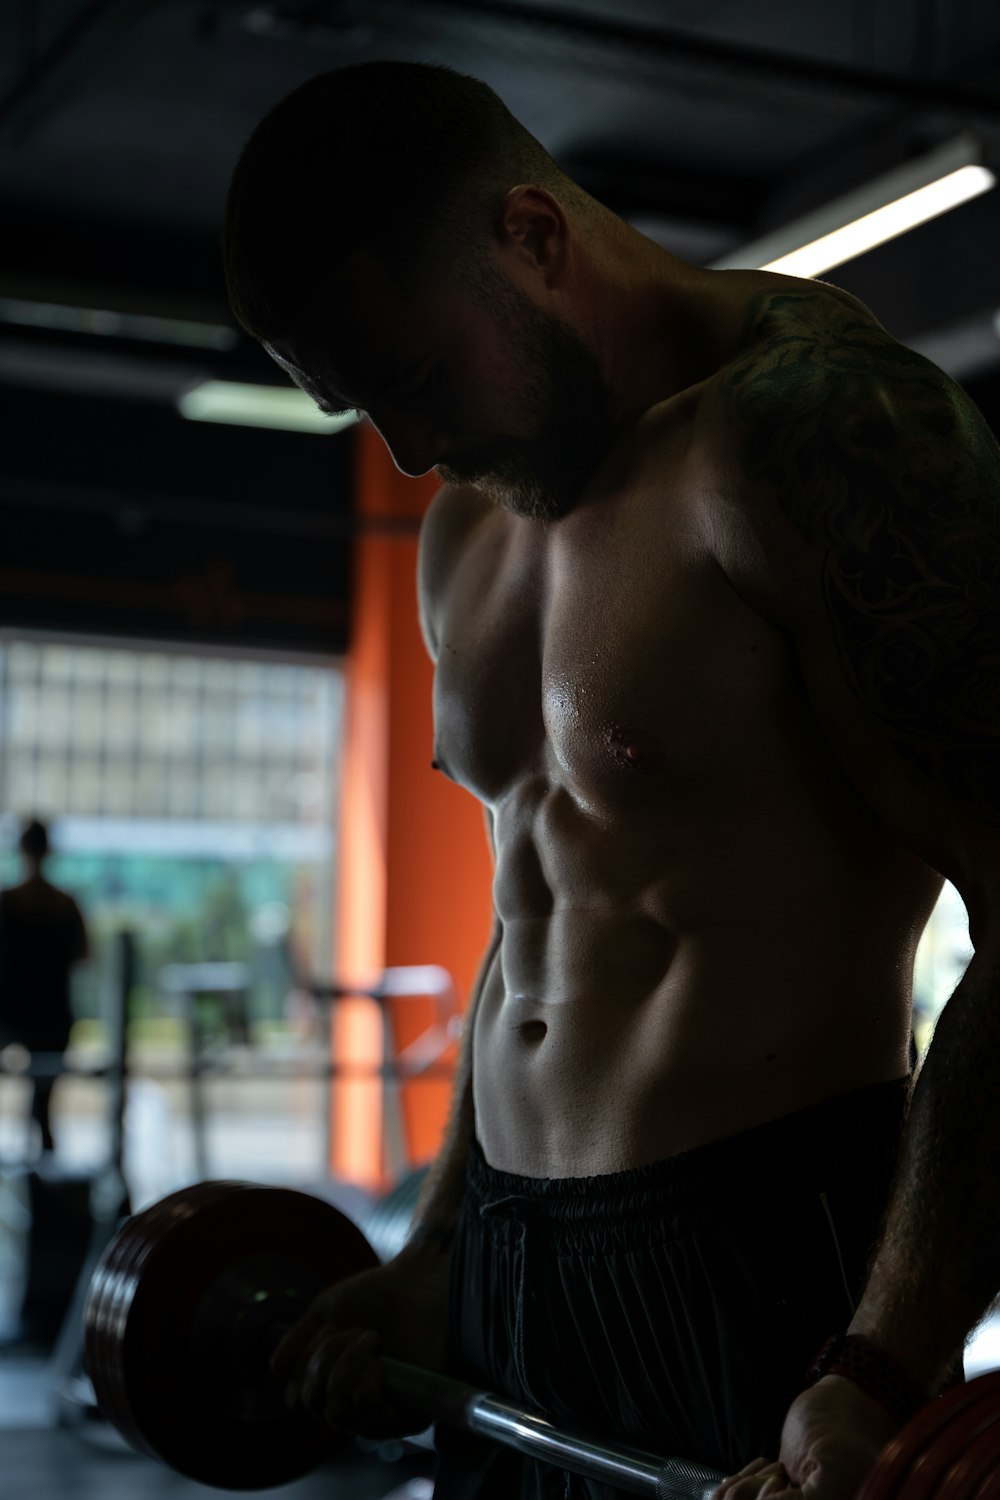 Fit Body Pictures | Download Free Images on Unsplash